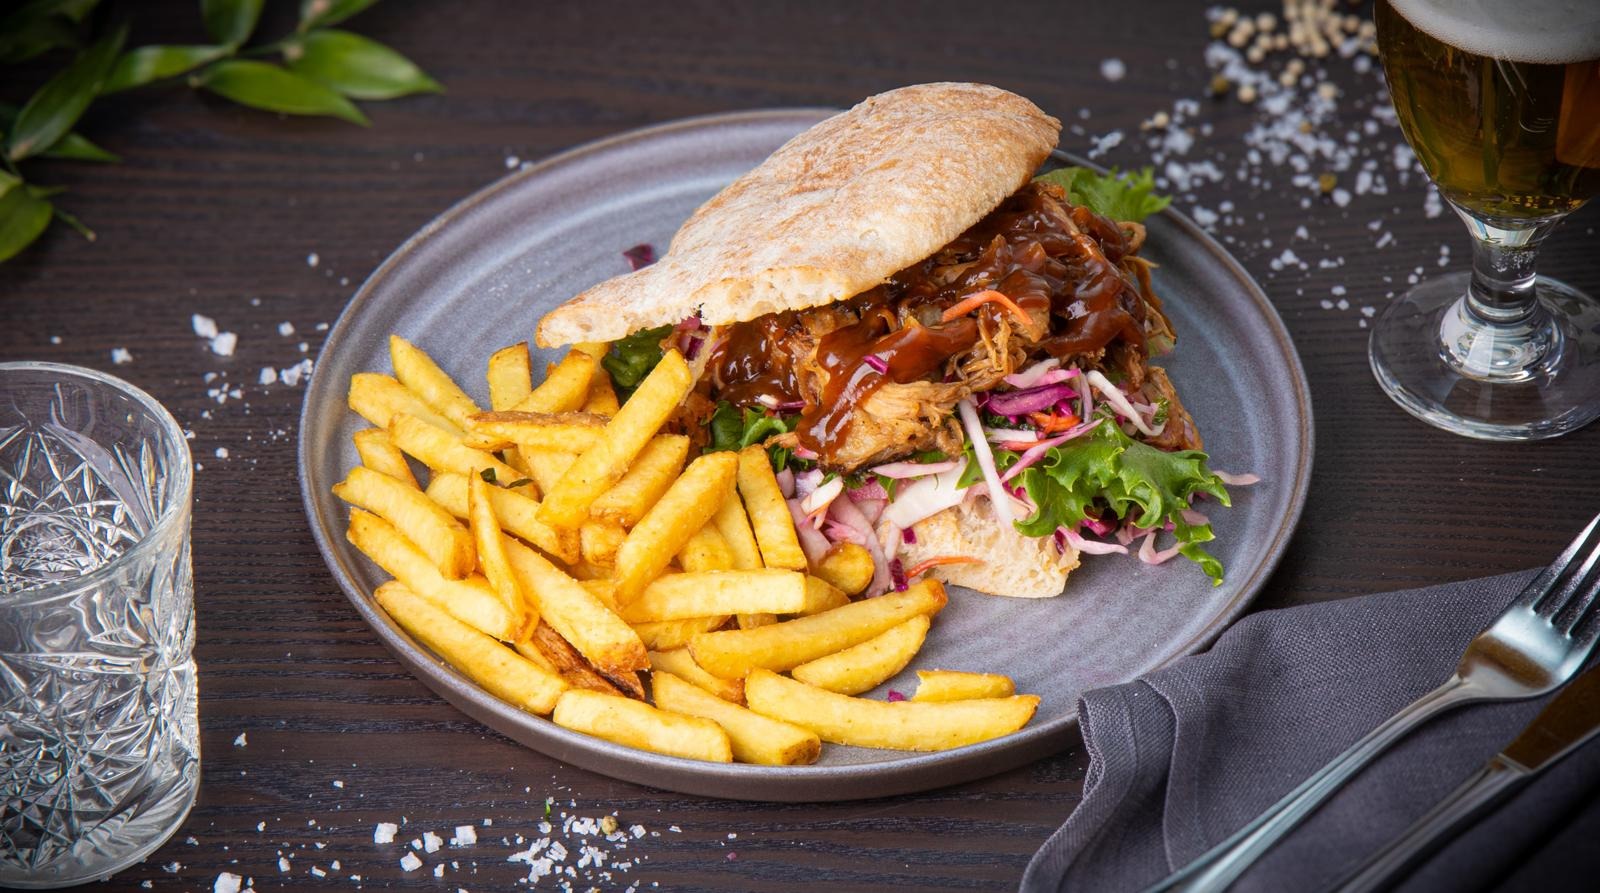 Pulled Pork sandwich, BBQ-sauce flavored with Jaloviina, coleslaw and country fries